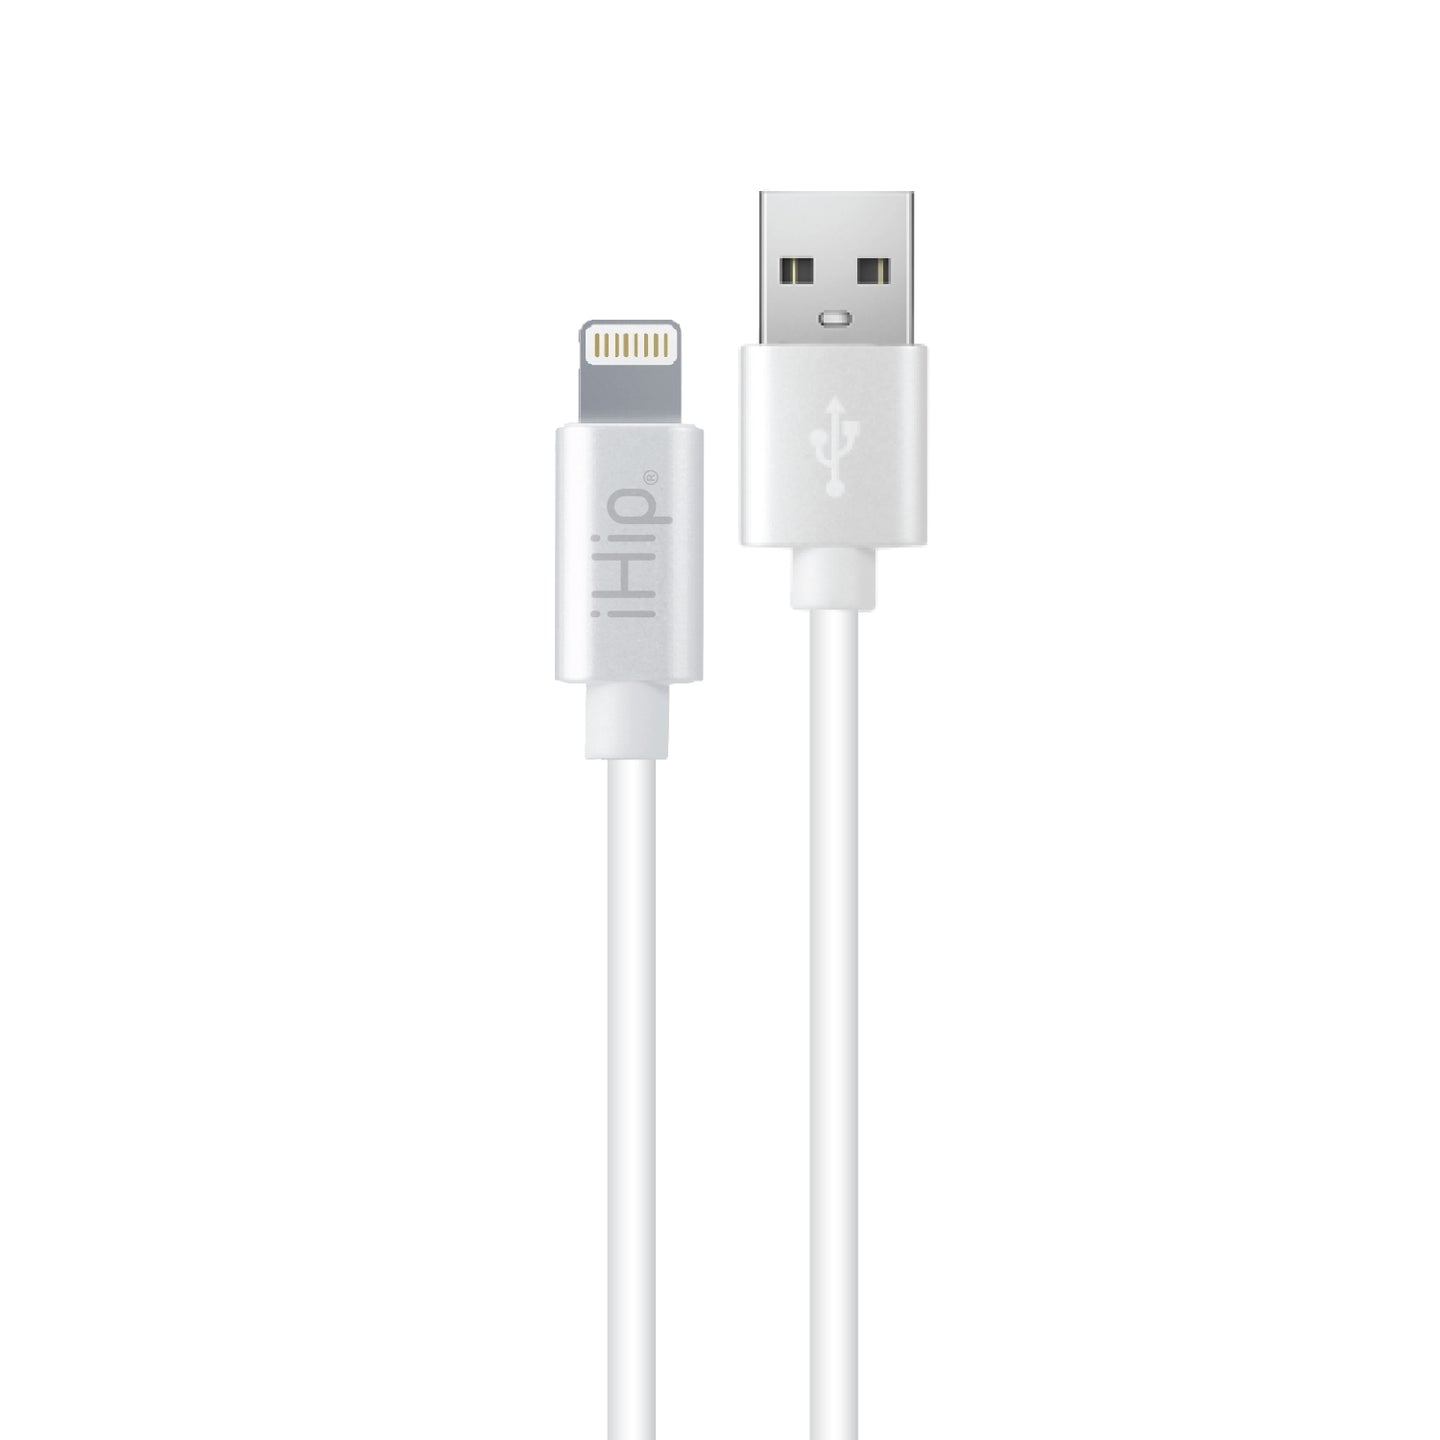 iHip 6ft Lightning Charging Cable for iPhone